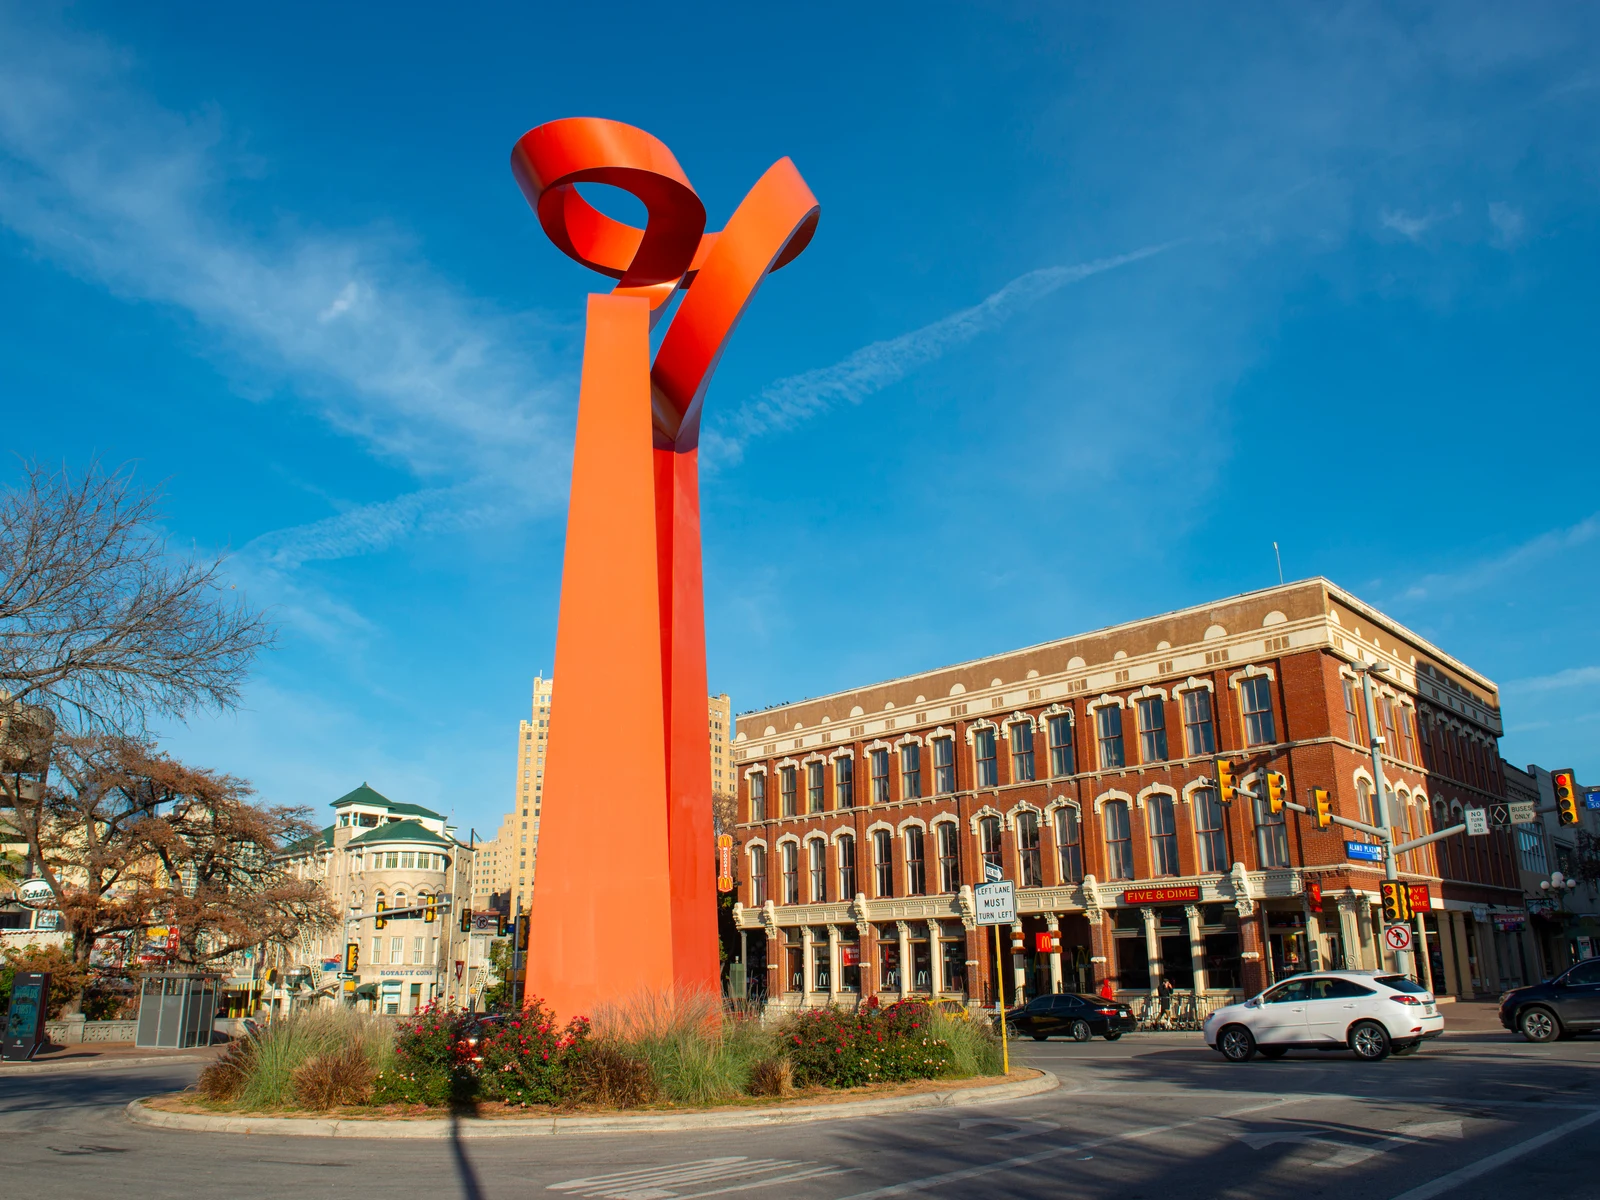 Giant public art sculpture, one of the best things to do in San Antonio